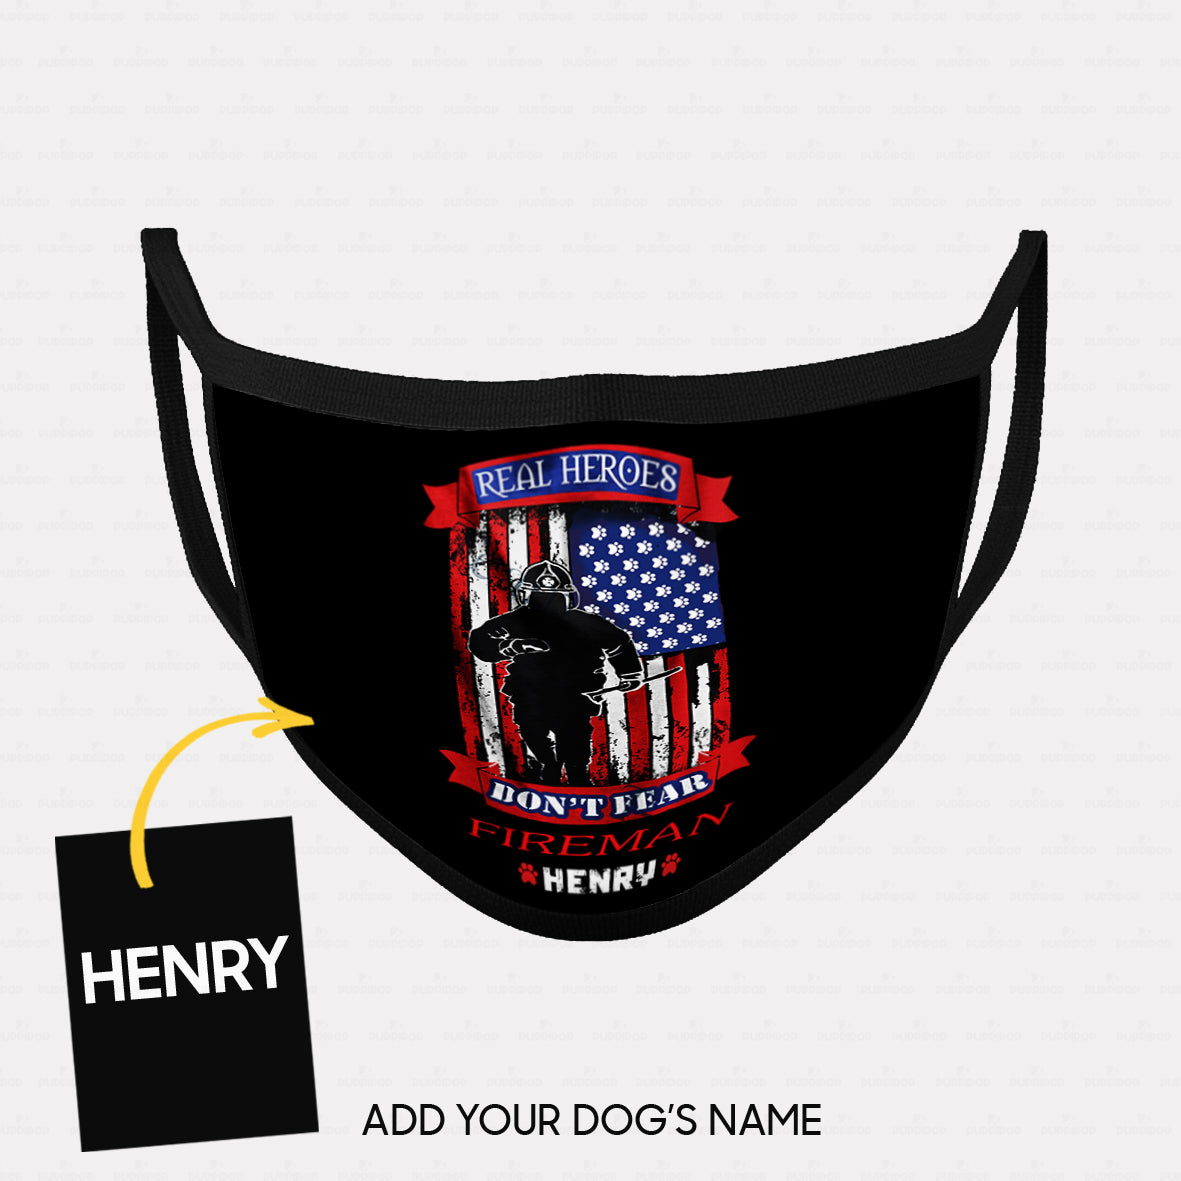 Personalized Dog Gift Idea - Real Heroes Don't Fear For Dog Lovers - Cloth Mask